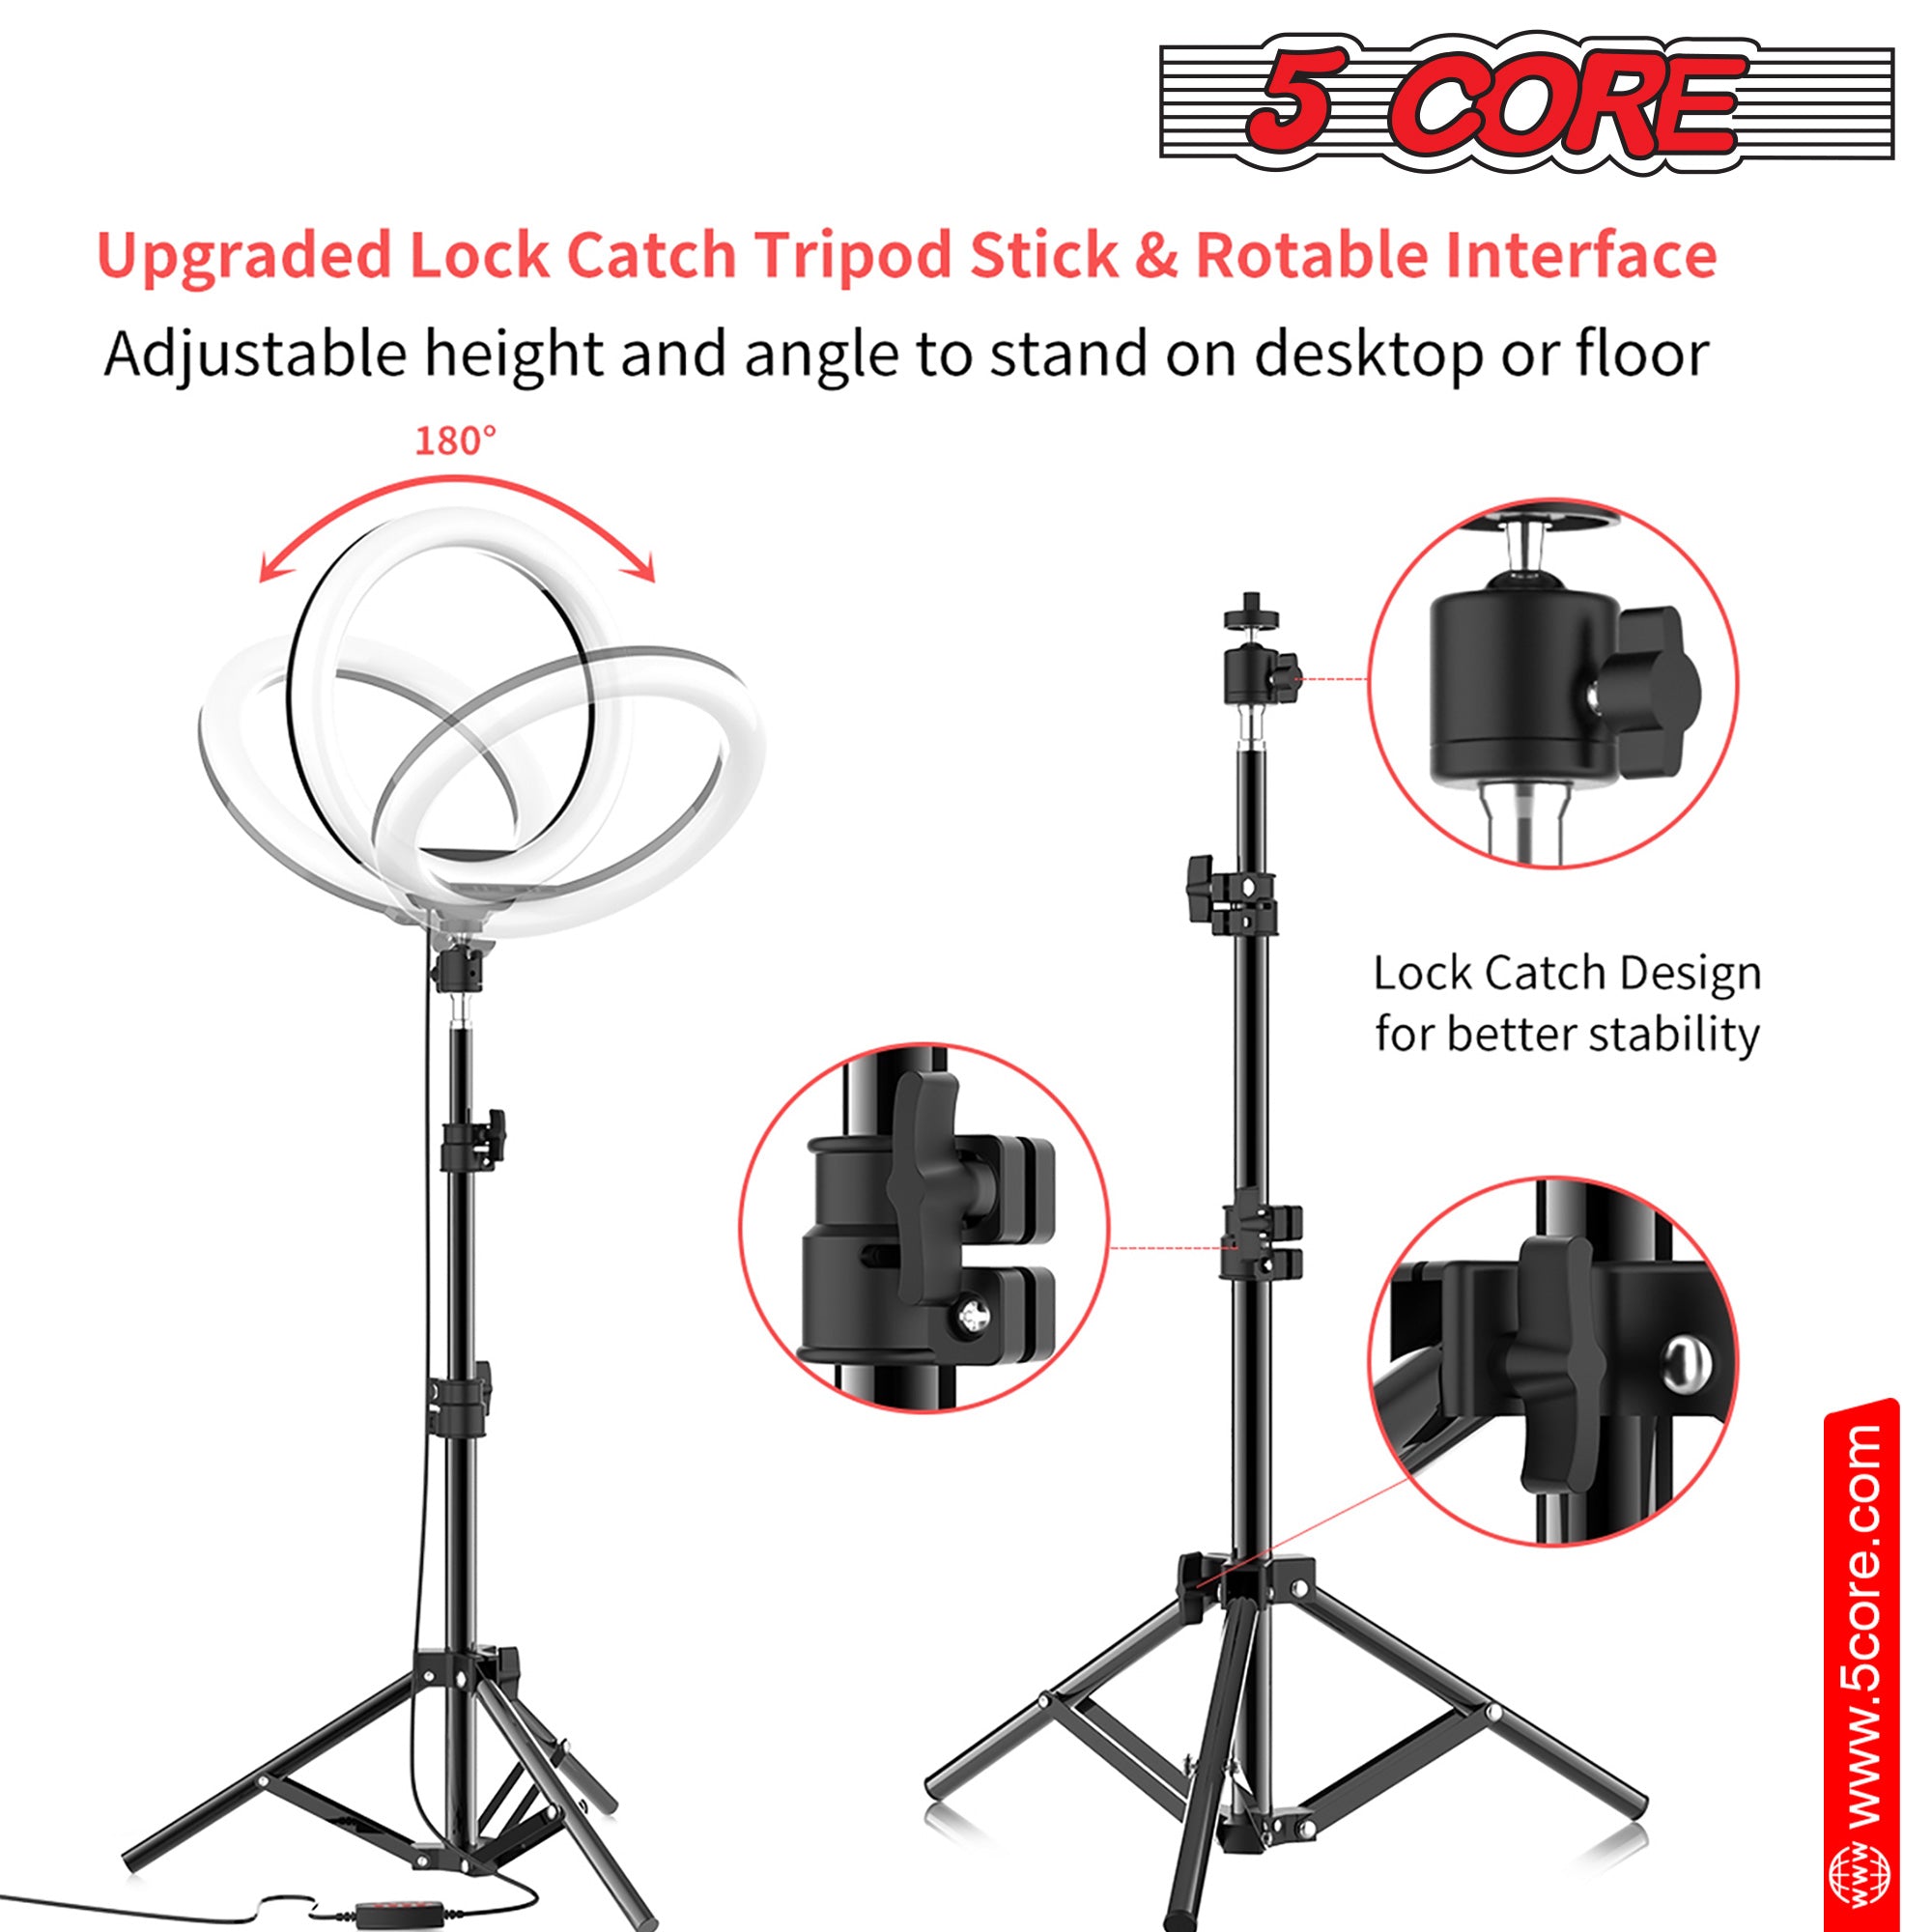 5 Core Ring Light 10 Inch W Tripod Phone Stand Adjustable Selfie Lights For Makeup Recording Podcast Streaming w Remote Included - RL 10